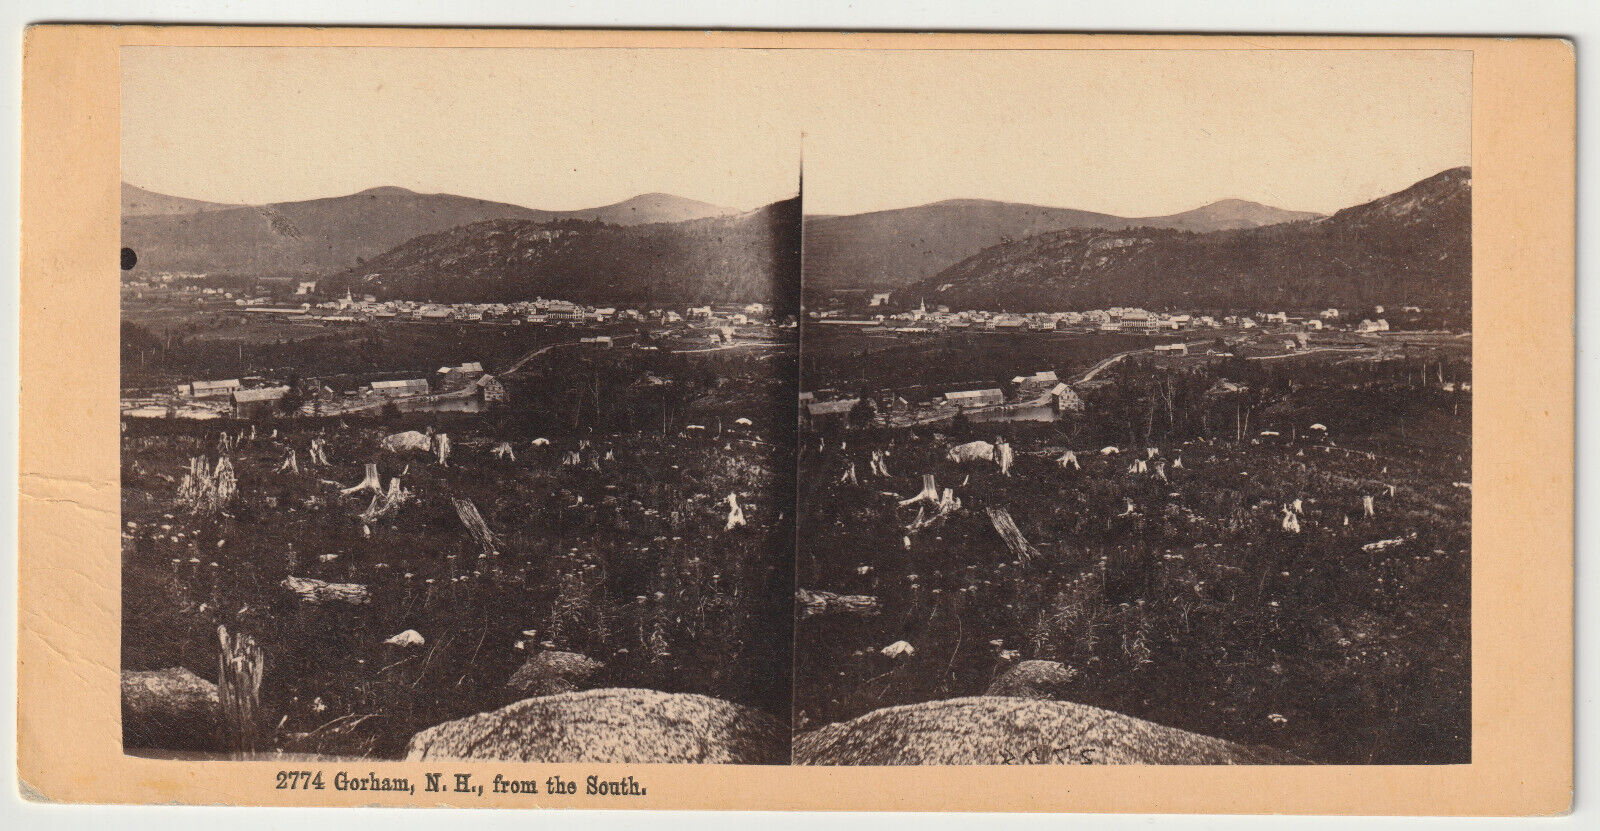 BIRDS EYE VIEW - GORHAM FROM THE SOUTH - WHITE MOUNTAINS - BIERSTADT BROTHERS